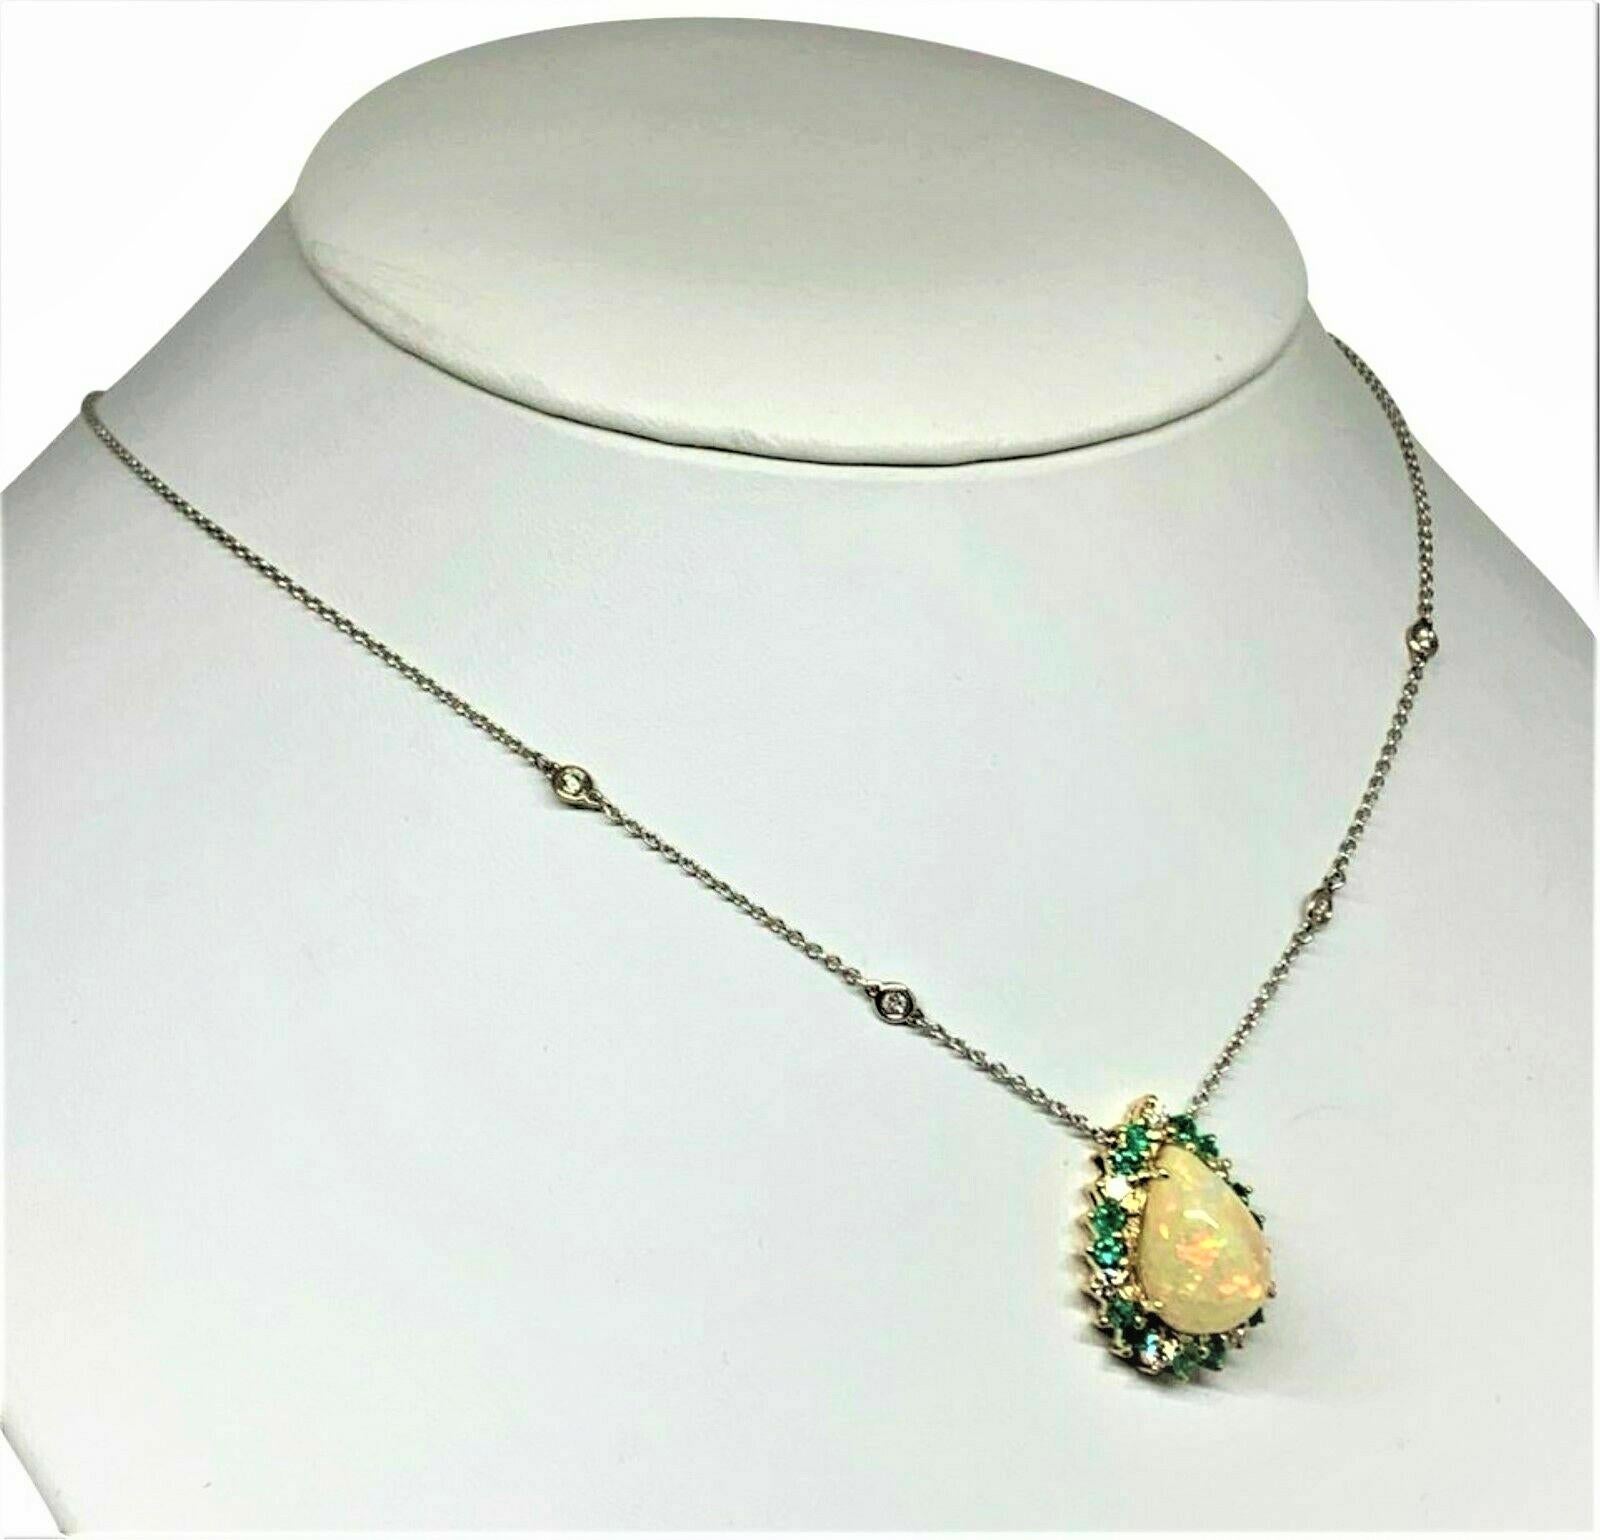 This is a very Fine Quality and Elegant Large Natural Opal surrounded by Emeralds and Diamonds LARGE 8.57 TCW hanging from a 14 KT Solid Gold Diamond Necklace
Made In Italy.

This necklace has been certified for $7,950 
This is a One of a Kind